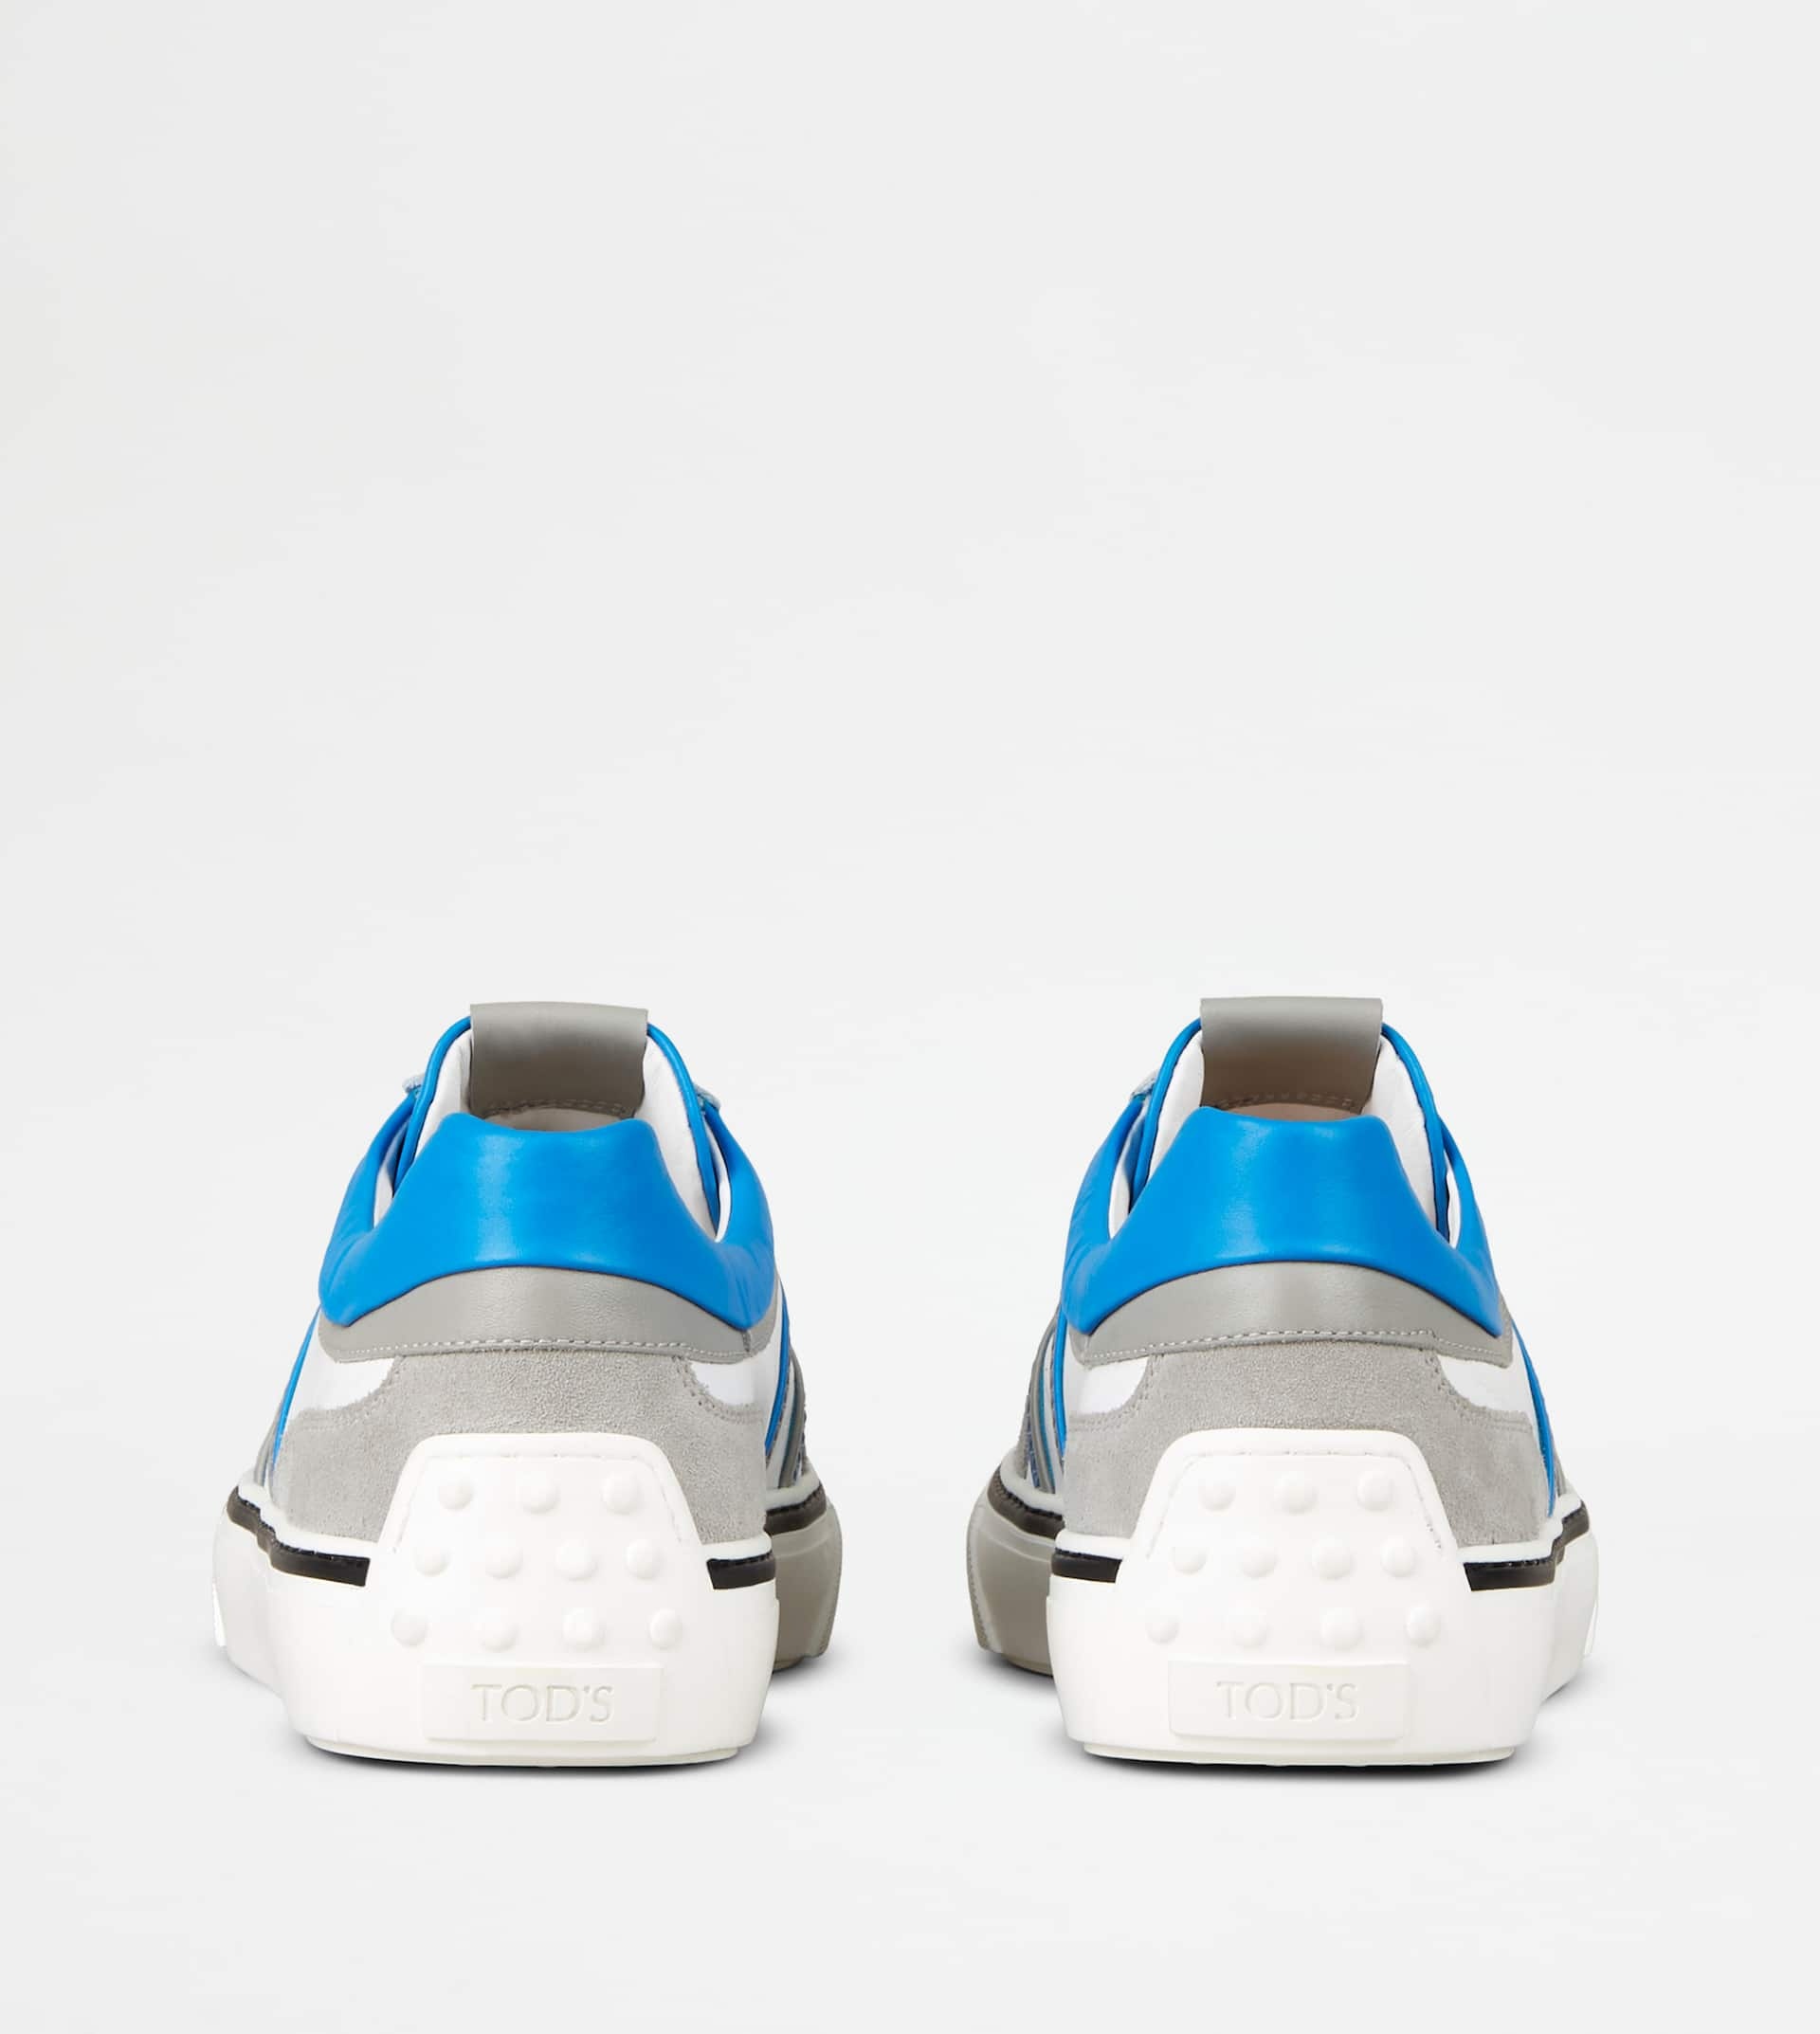 SNEAKERS IN LEATHER - GREY, WHITE, LIGHT BLUE - 3